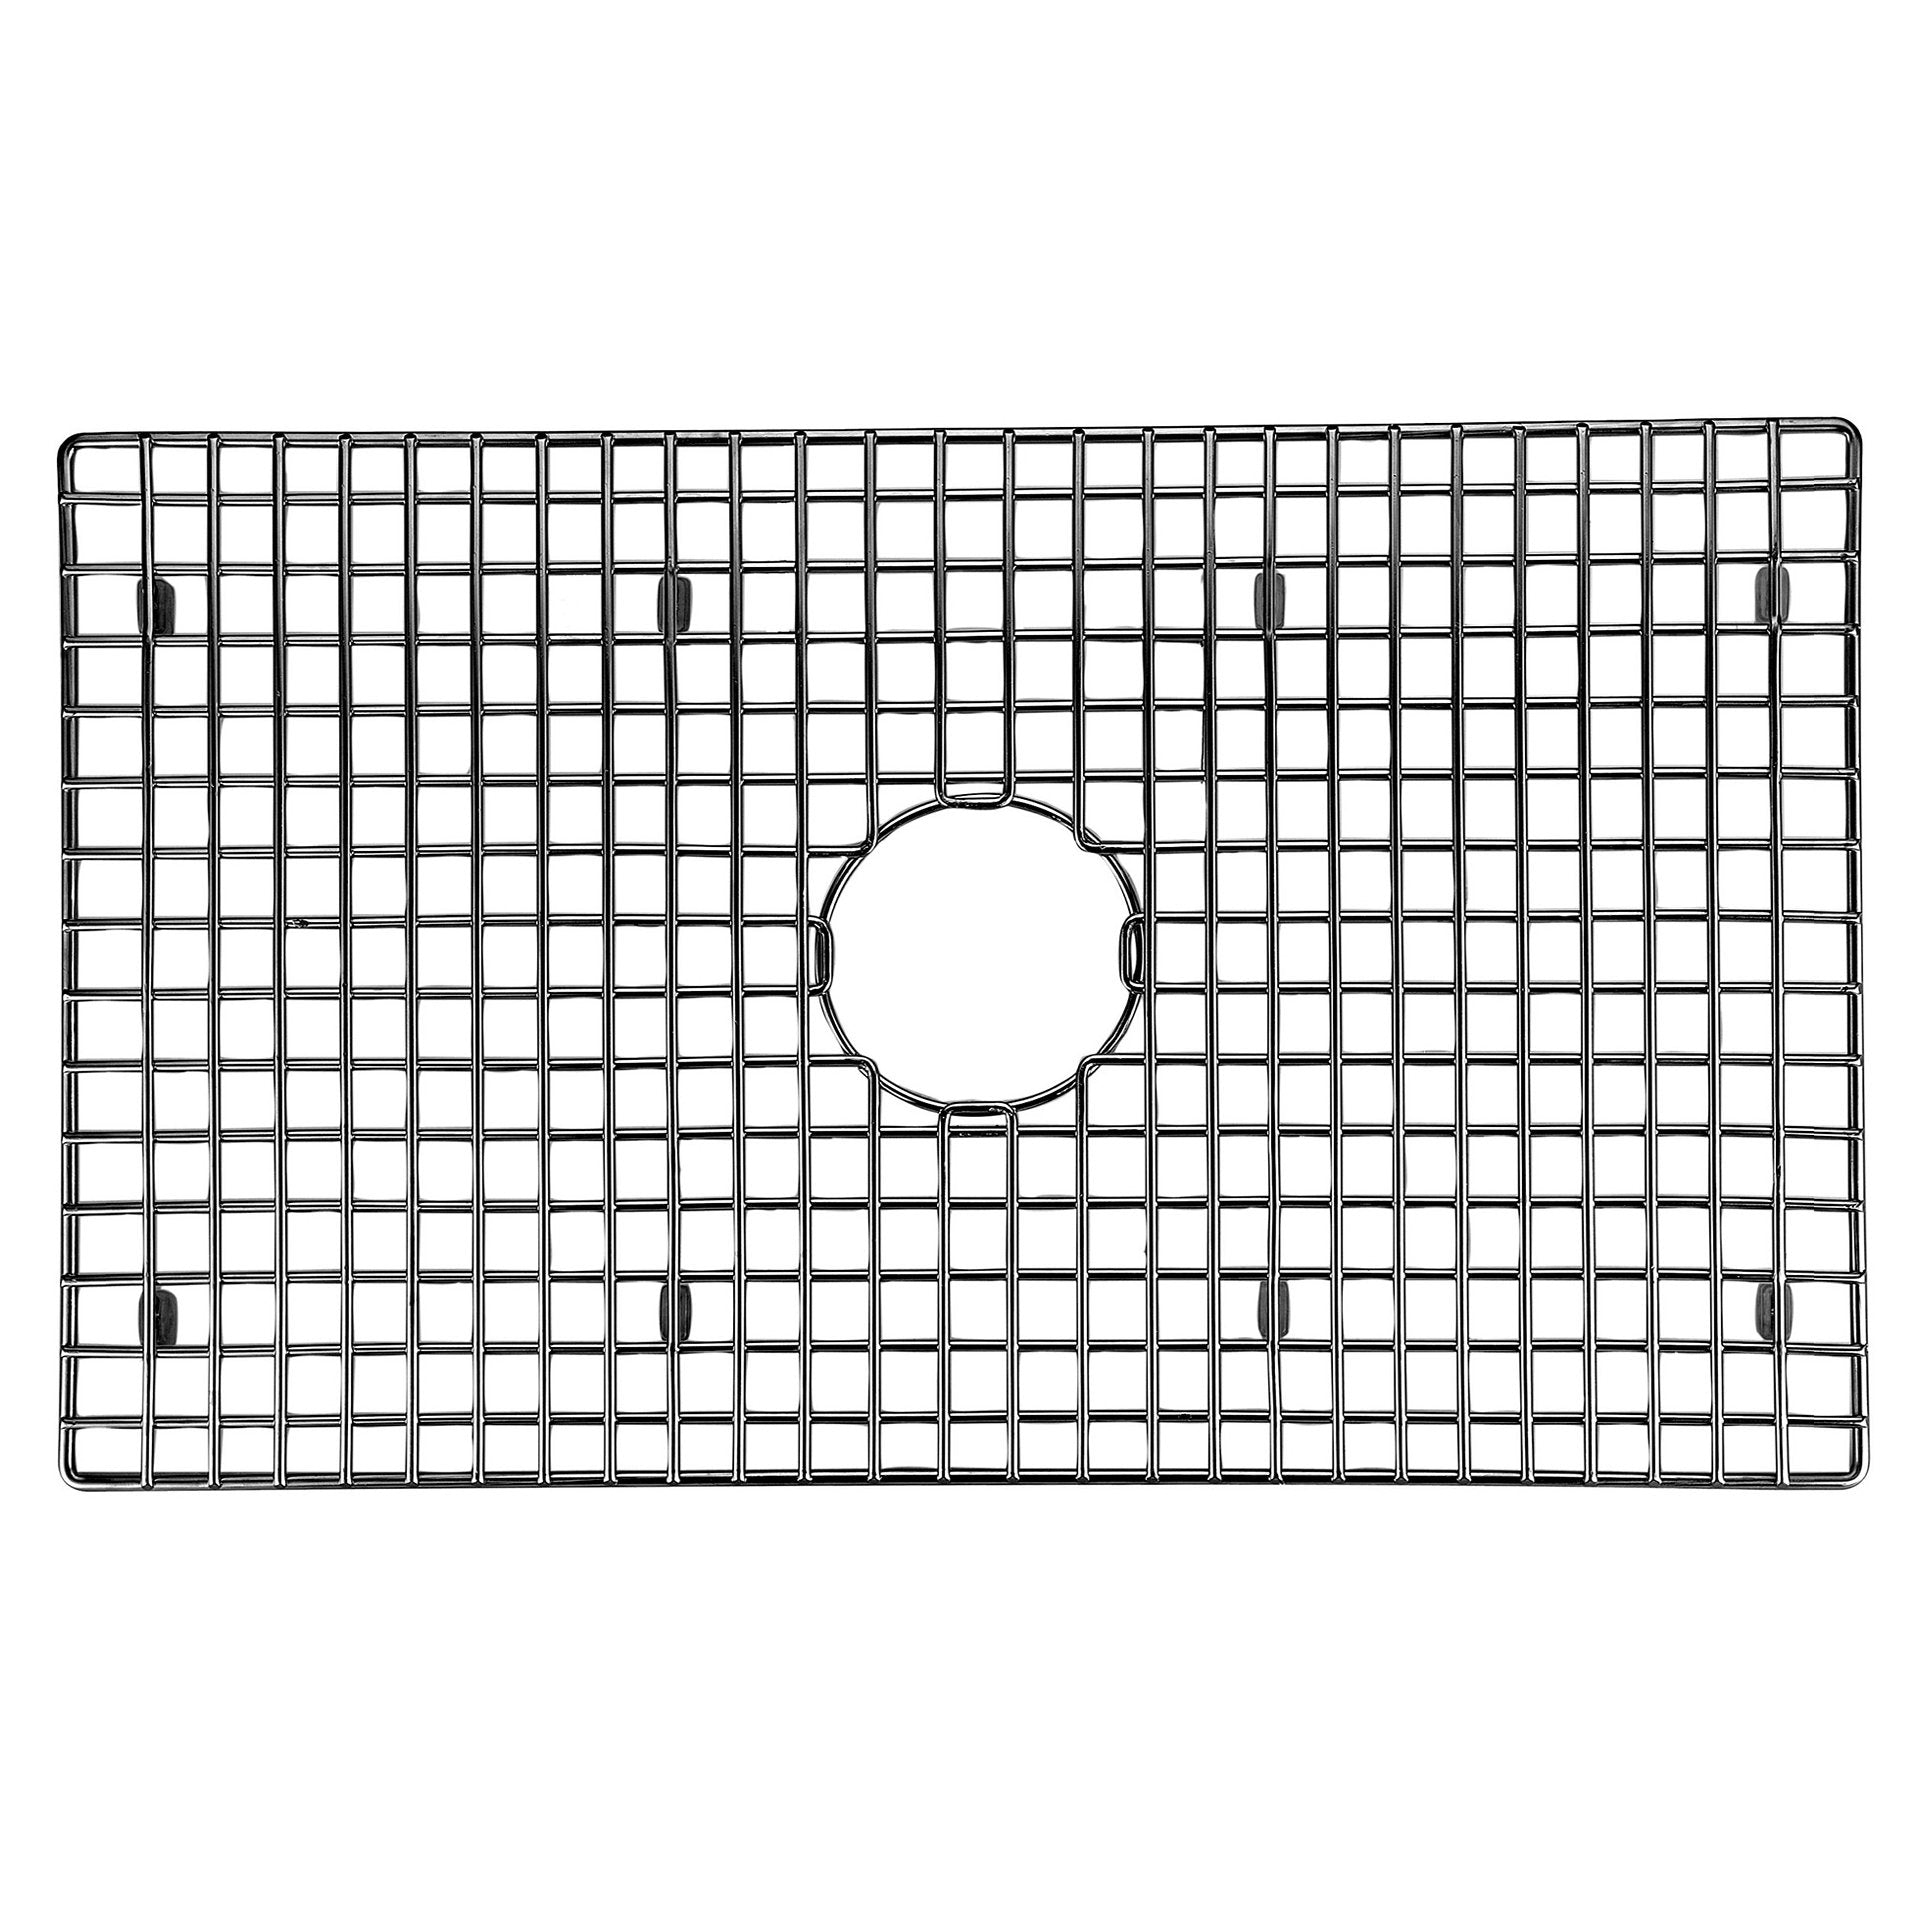 Dawn G810 Stainless Steel Bottom Grid-Kitchen Accessories Fast Shipping at DirectSinks.